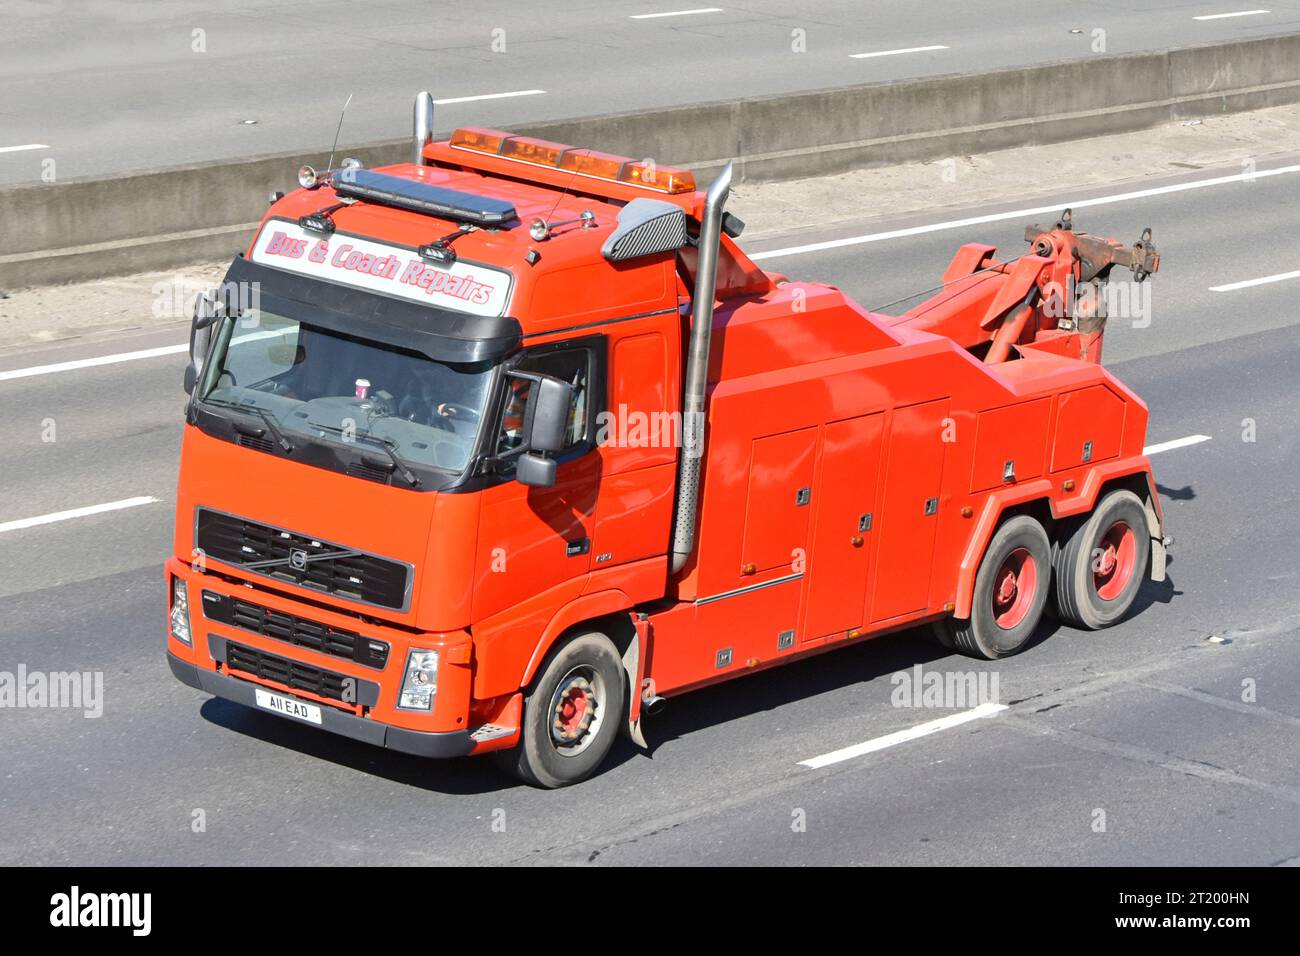 Looking down on clean red unmarked paint on bus & coach Volvo hgv lorry truck a commercial vehicle tow recovery breakdown business on M25 UK motorway Stock Photo